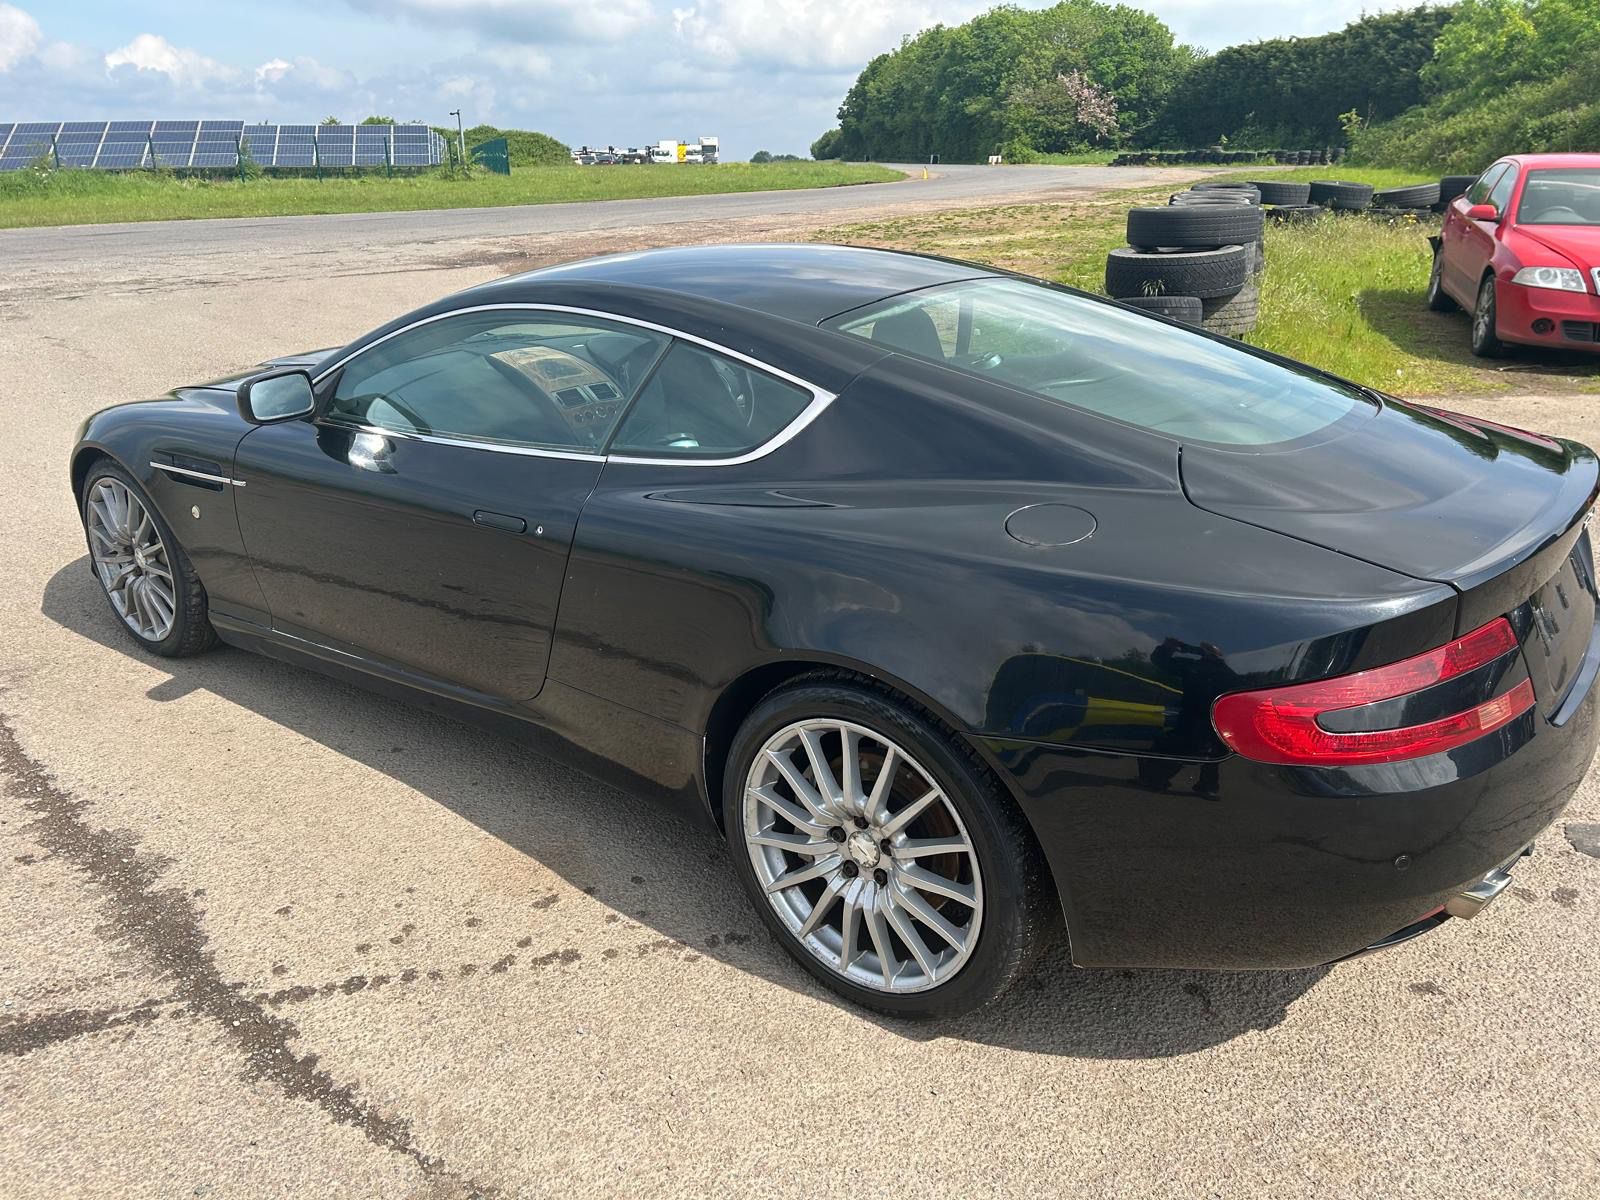 2005 Aston Martin DB9 V12 Tiptronic- No Reserve - Will have have 12 months MOT at point of sale - Image 4 of 7